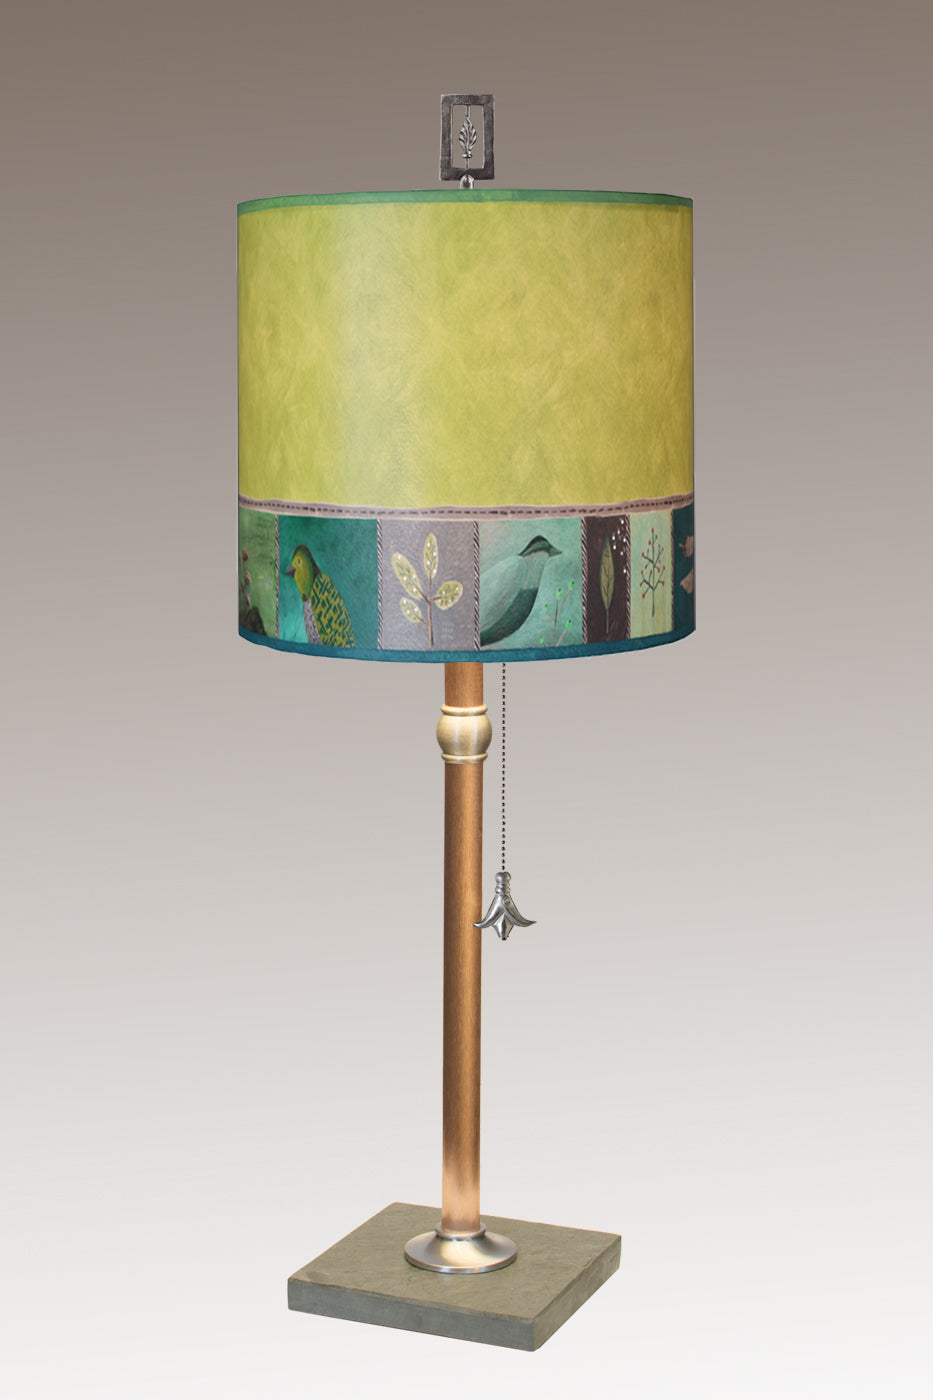 Janna Ugone &amp; Co Table Lamps Copper Table Lamp with Medium Drum Shade in Woodland Trails in Leaf